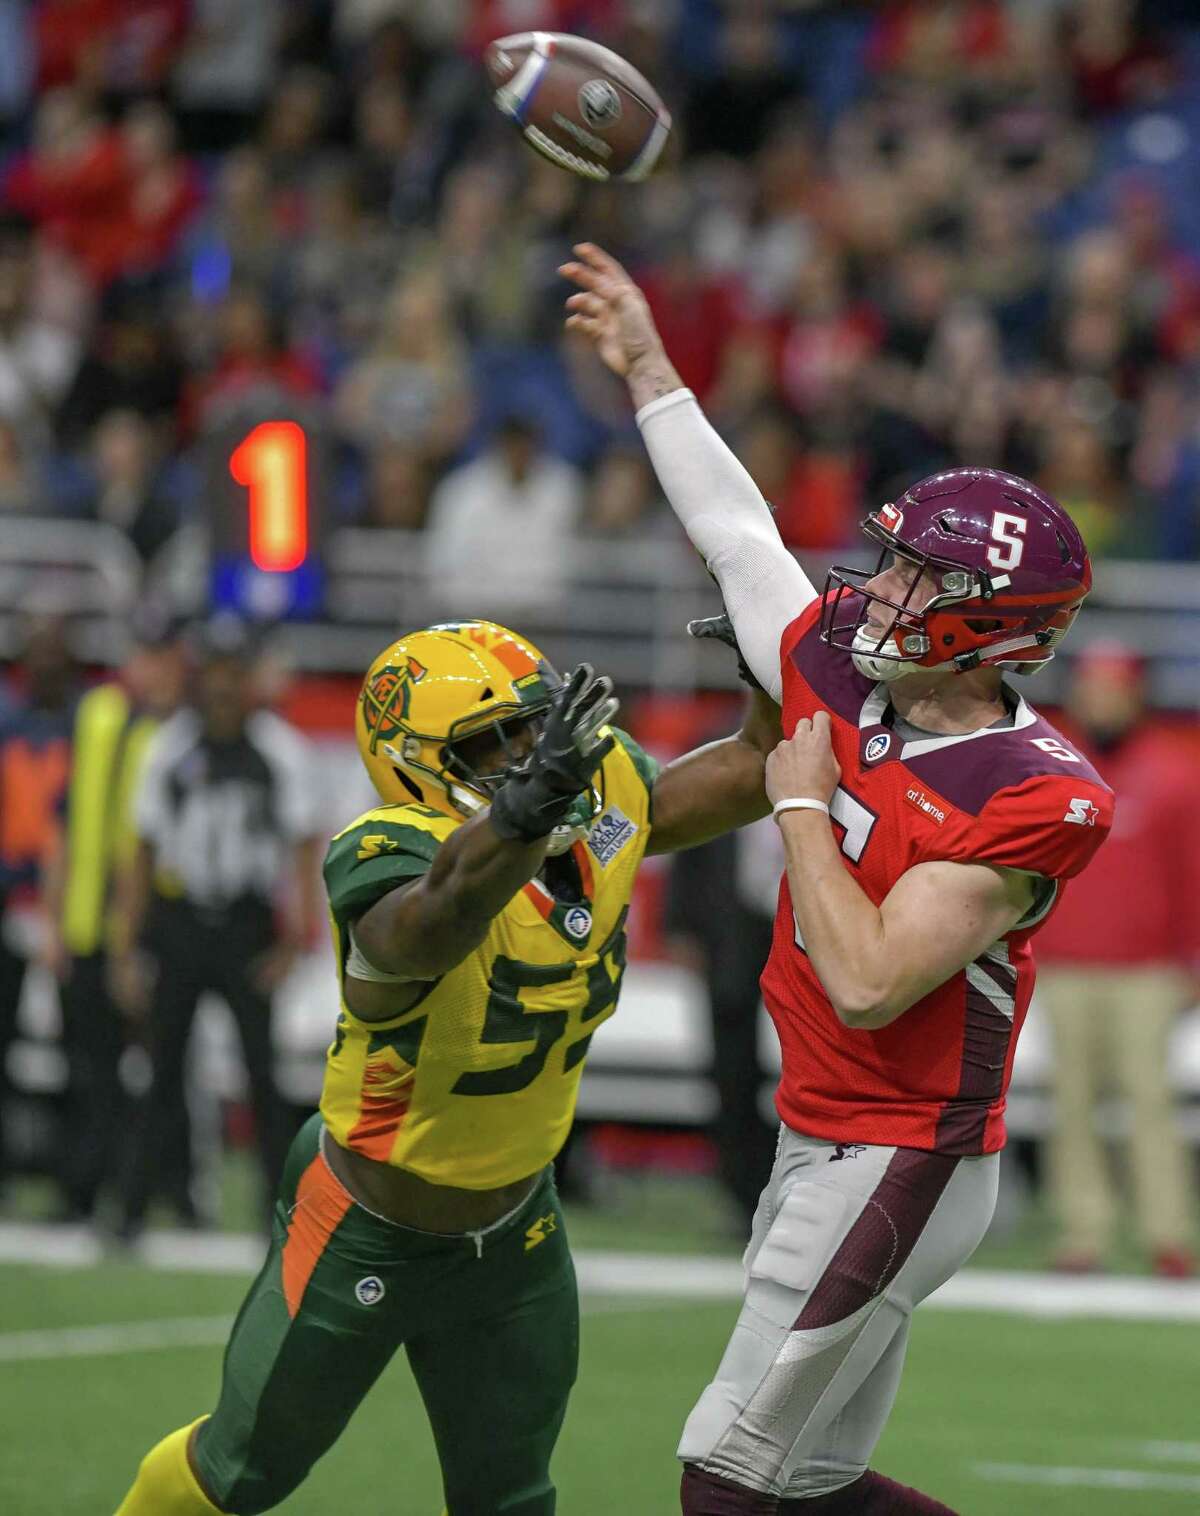 San Antonio Commander's quarterback Logan Woodside (5)is pressured by Steven Johnson (59) during the AAF game against Arizona Hotshots on March 31, 2019 at the Alamodome.